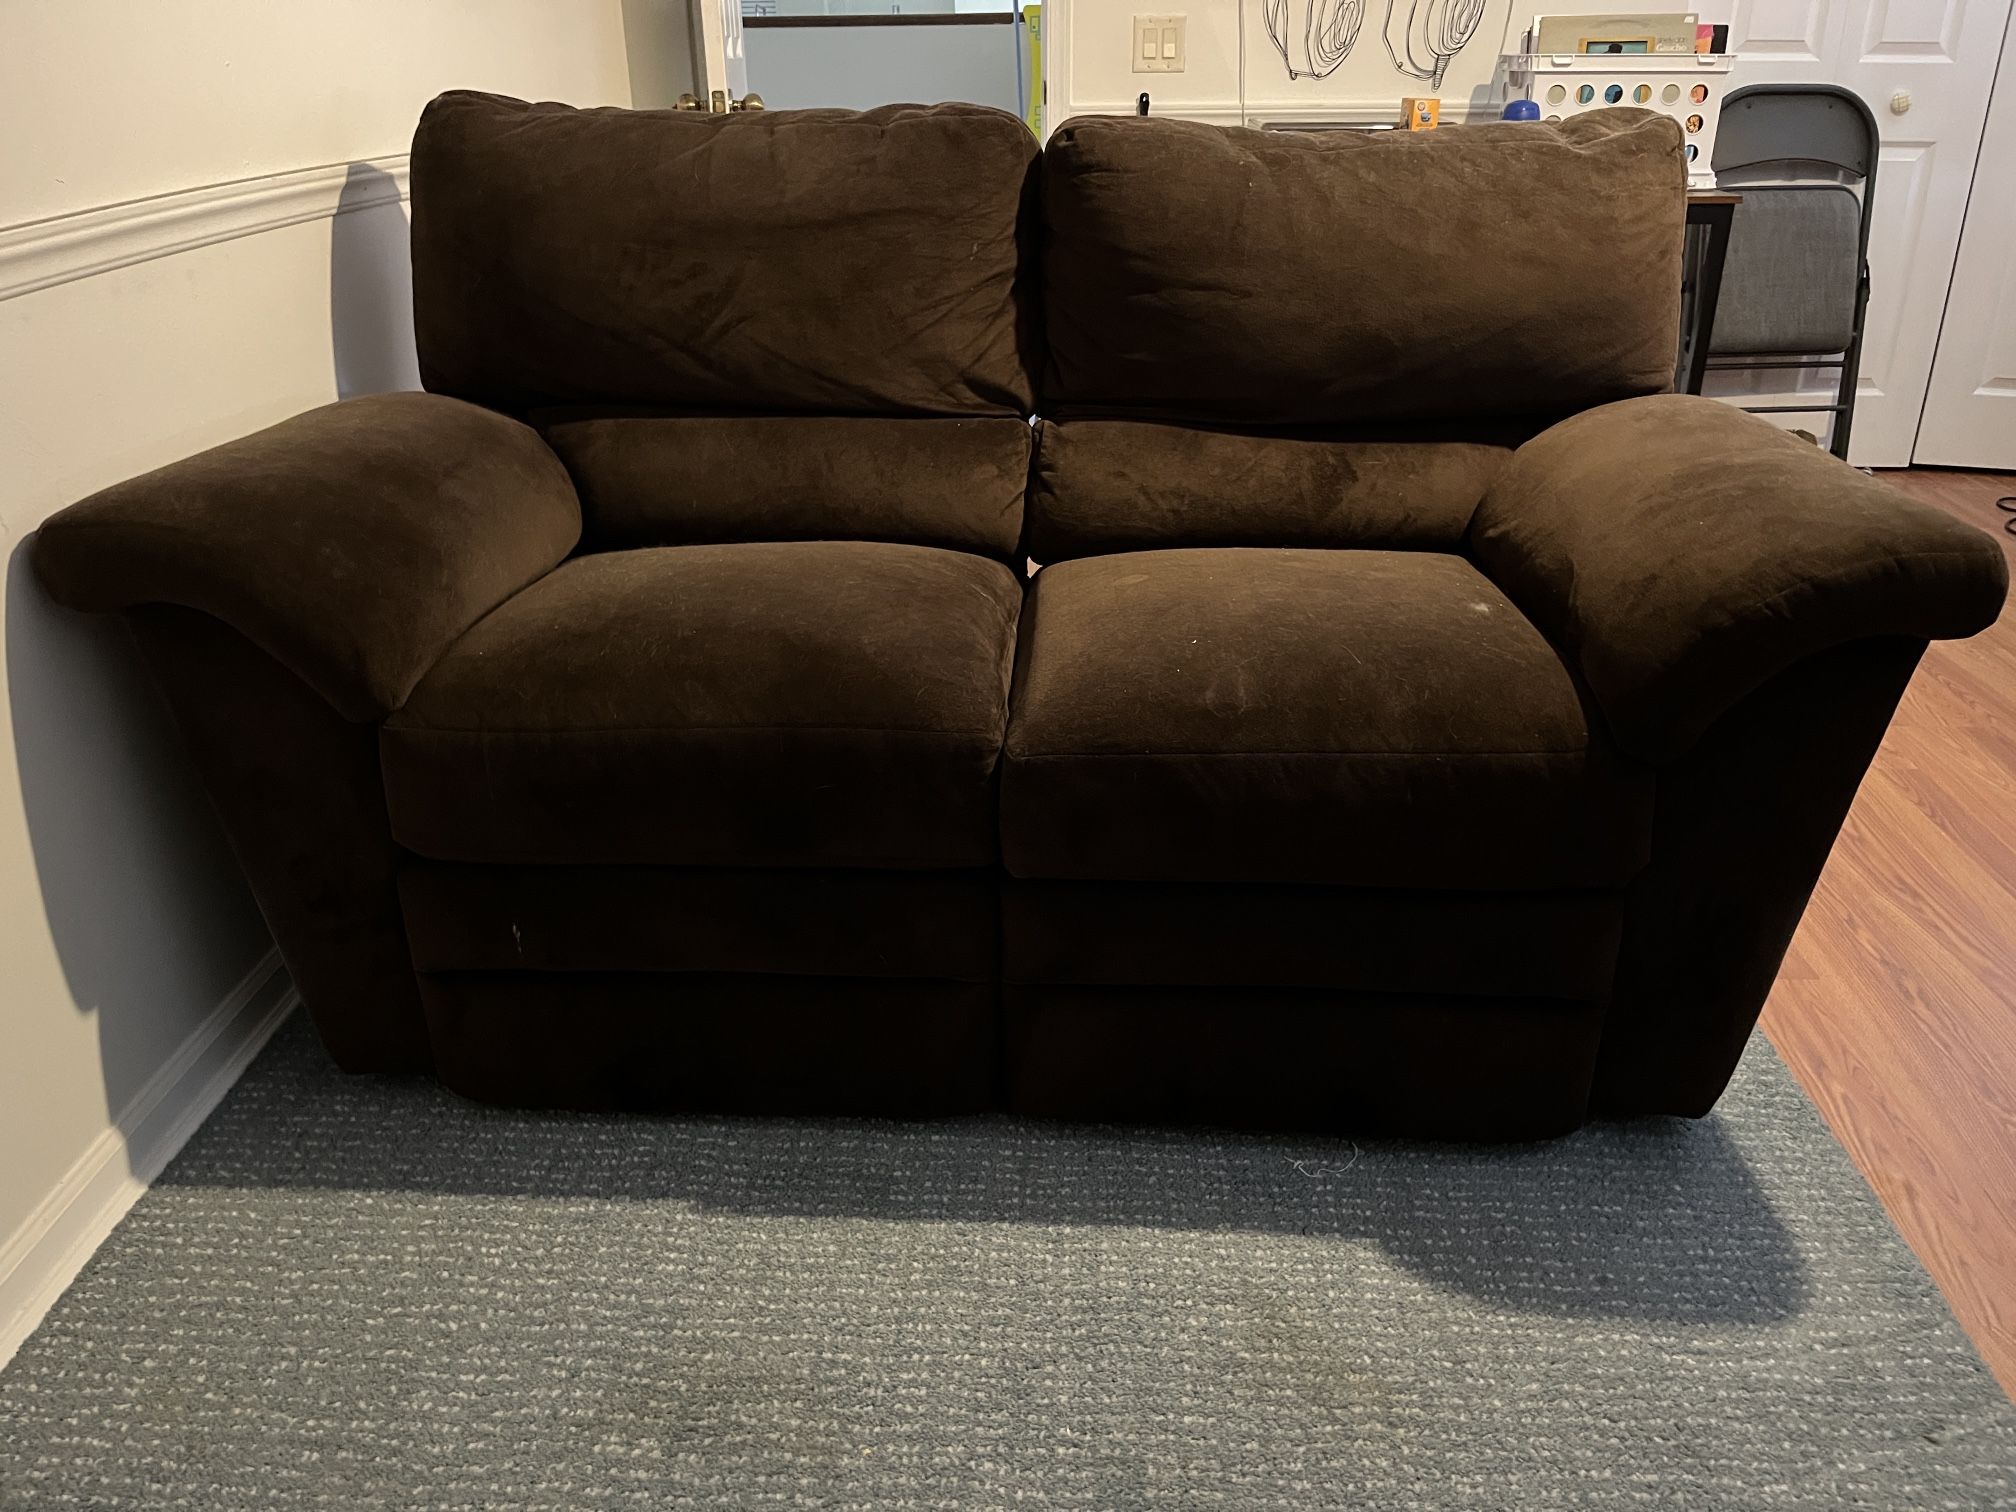 Loveseat Recliner by Lazyboy 